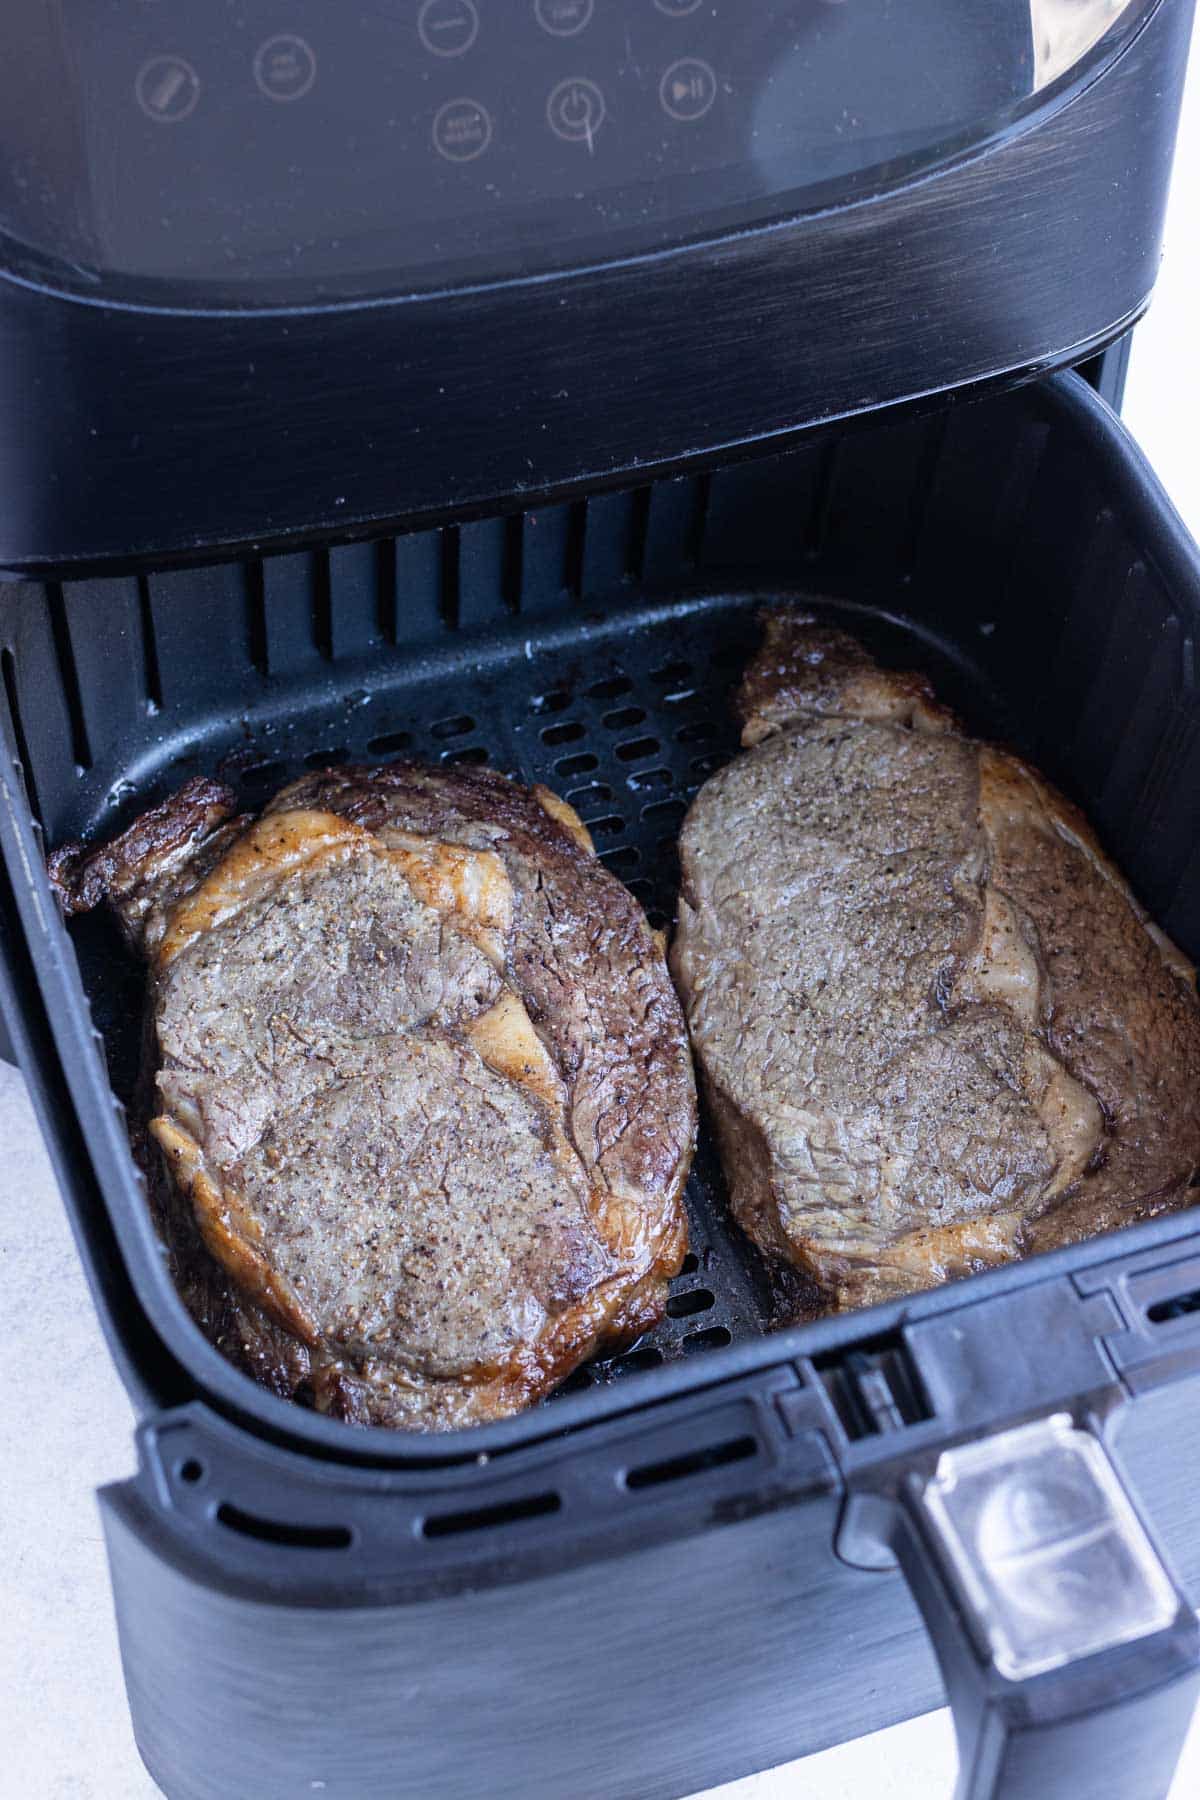 Perfectly cooked and flavorful steak from the air fryer.